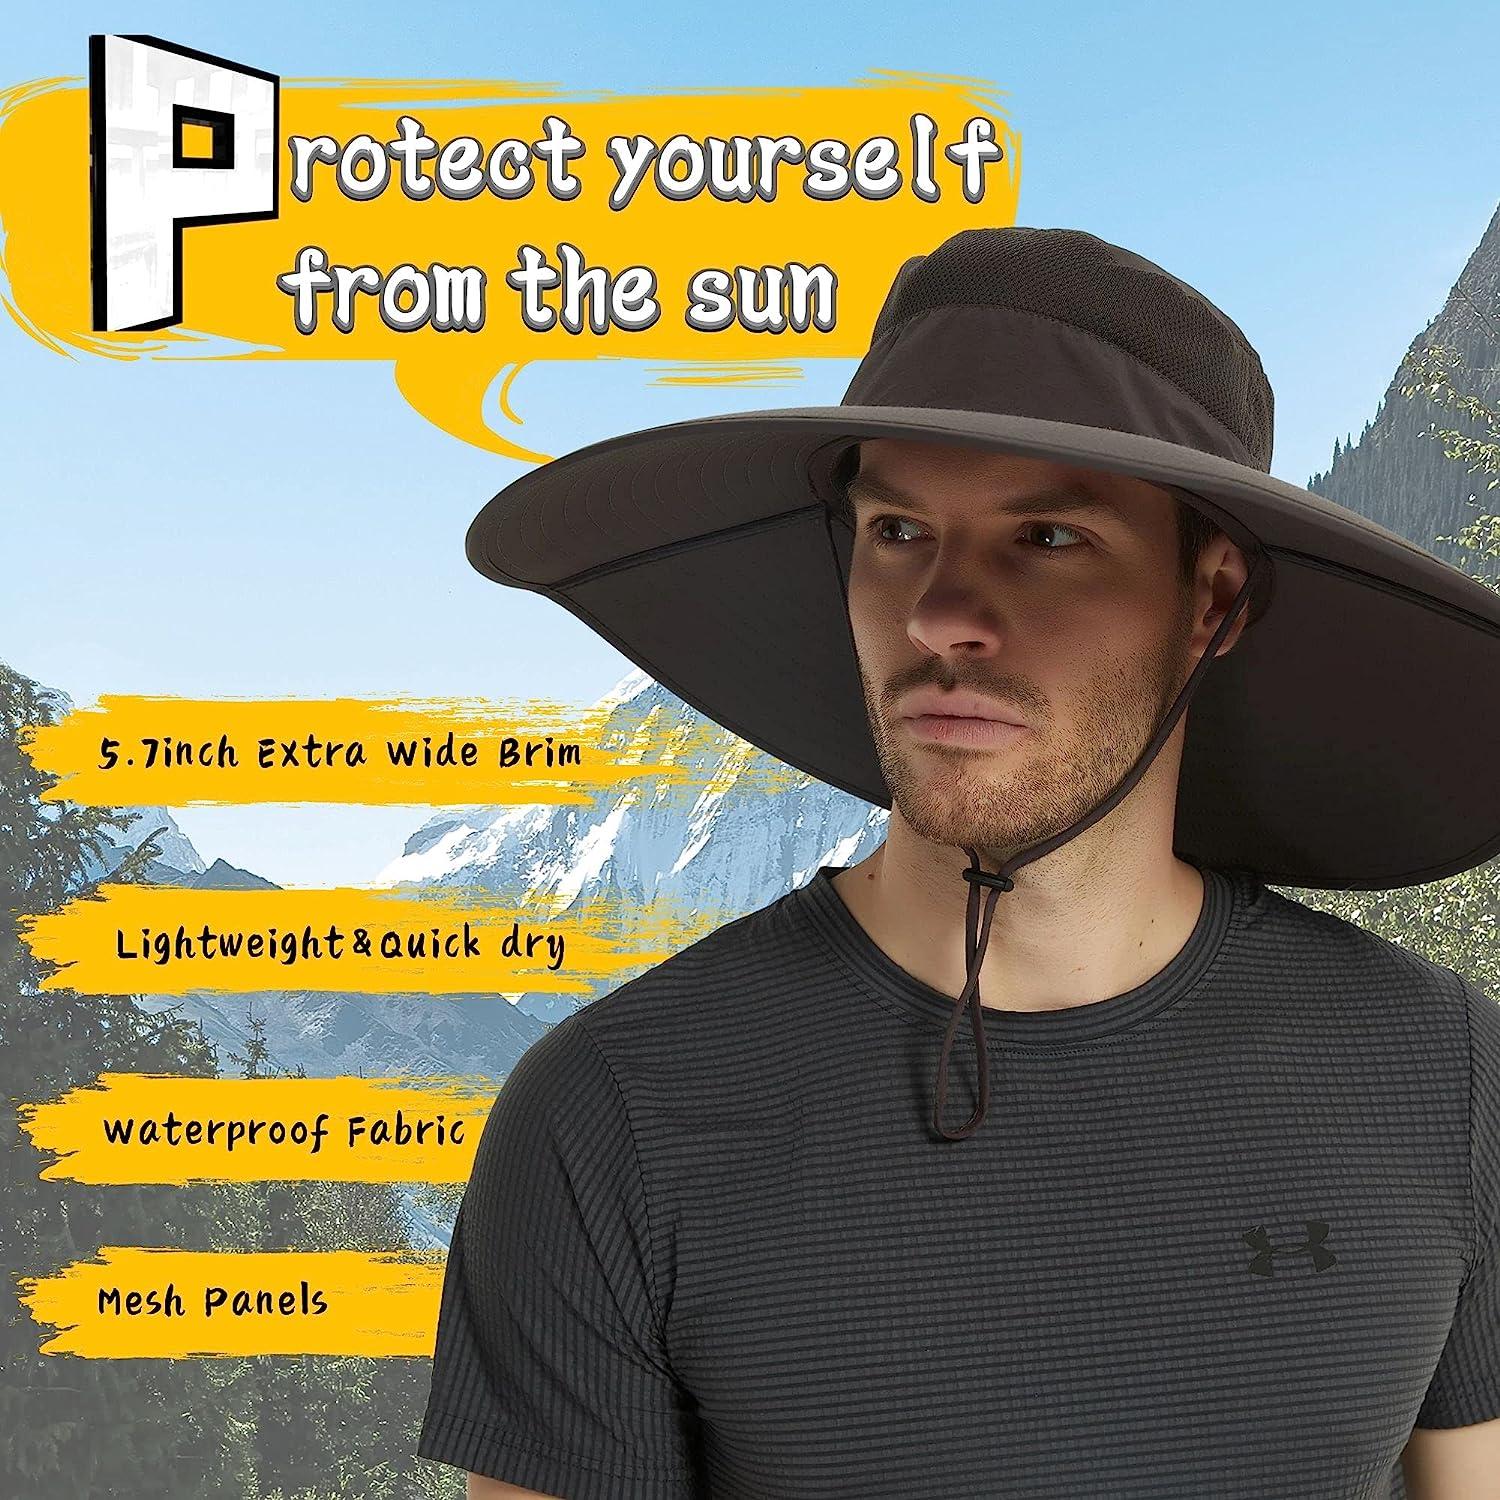 HLLMAN Super Wide Brim Sun Hat UPF 50+ Protection Hats for Mens/Womens  Large Buket hat for Fishing, Hiking, Gardening